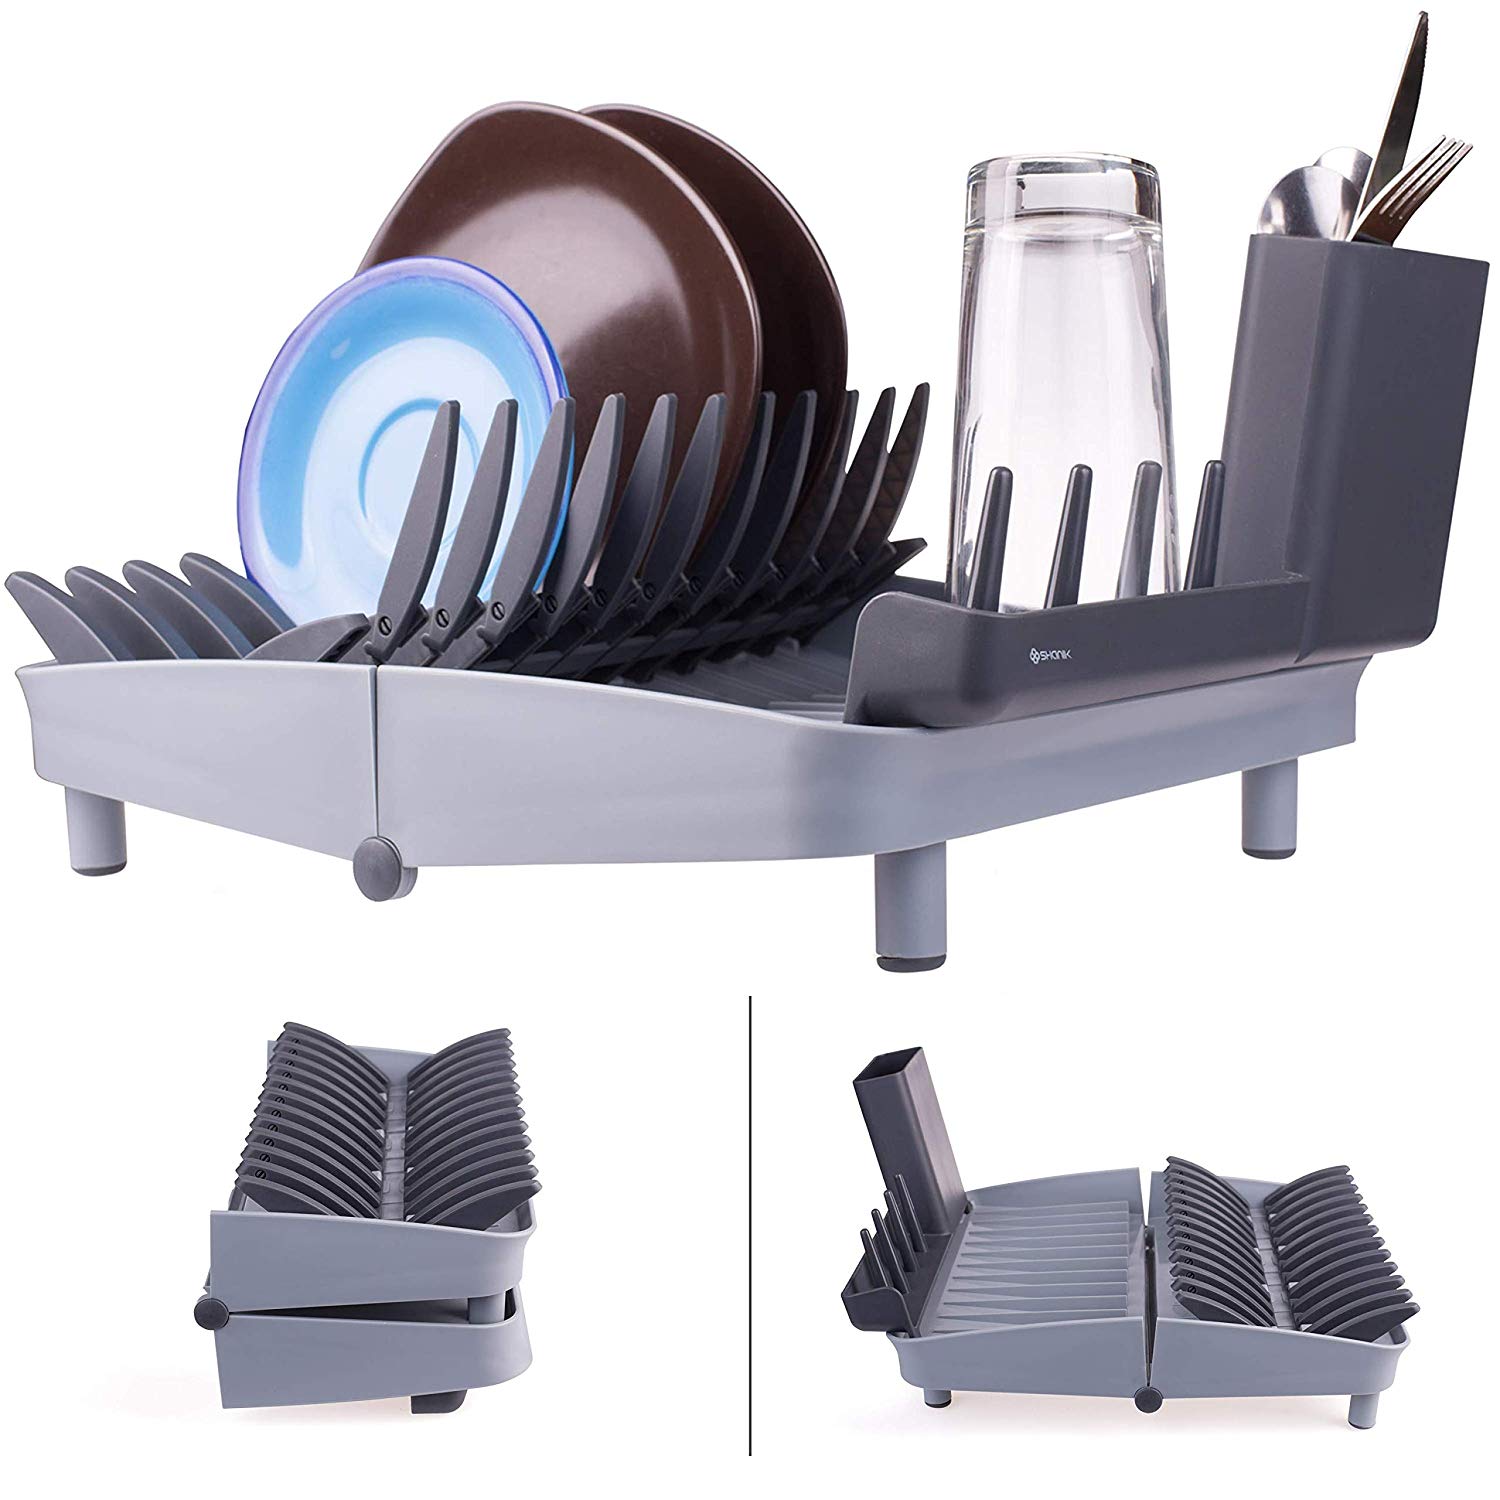 Folding Dish Rack, Collapsible Drying Rack Organizer for Medium and Small Plates, Glasses and Utensils, Easy to Clean, Perfect for Space Saving